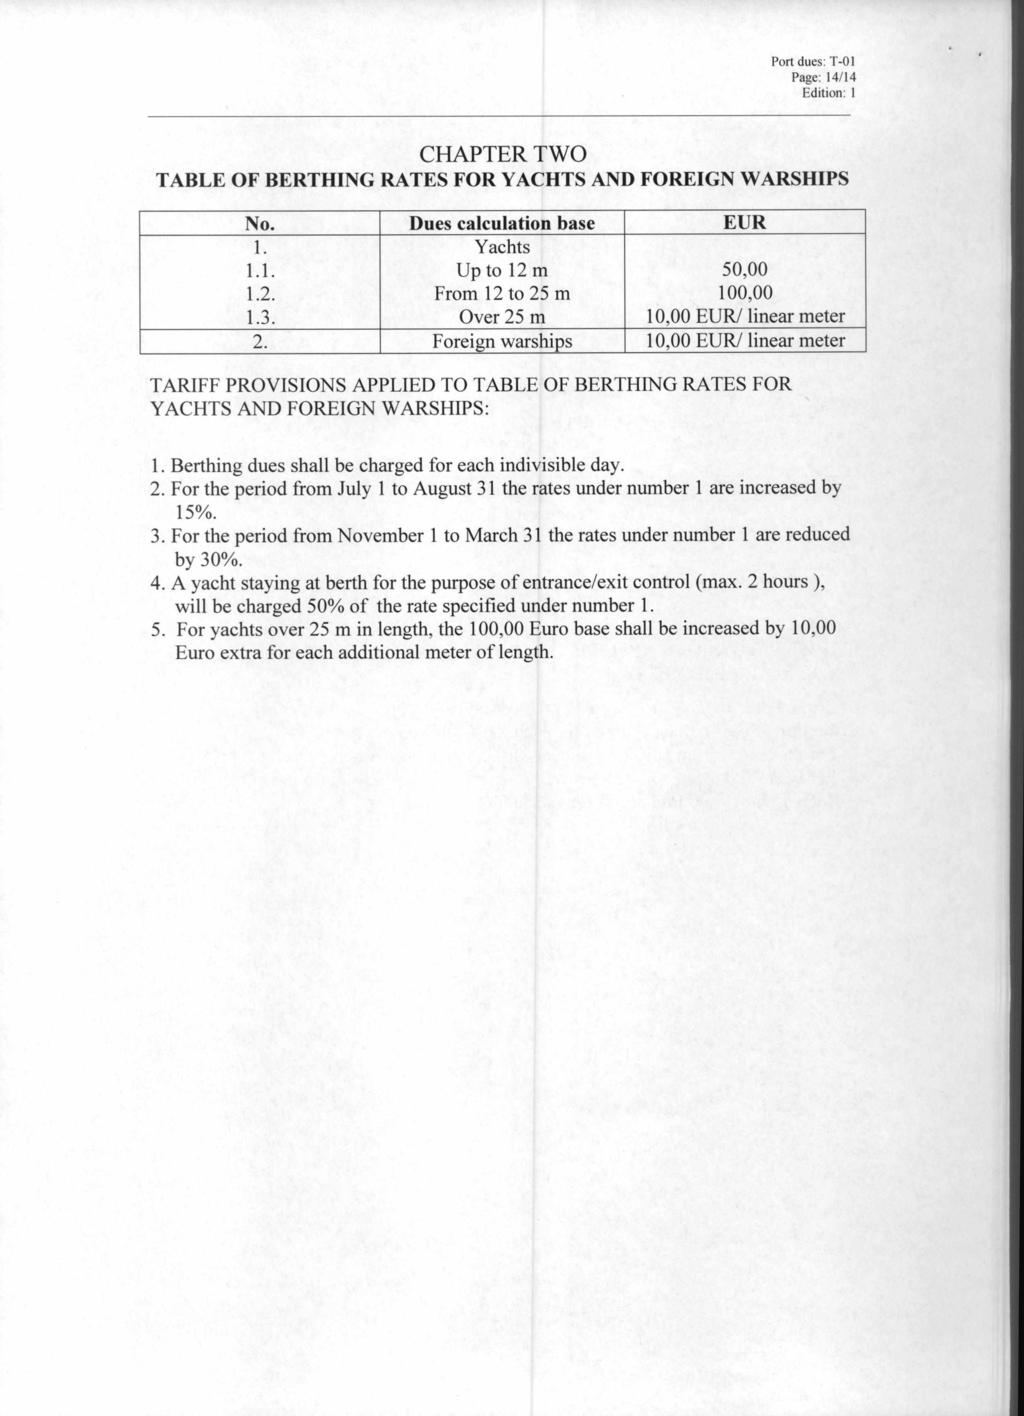 Page: 14/14 CHAPTER TWO TABLE OF BERTHING RATES FOR YACHTS AND FOREIGN WARSHIPS No. Dues calculation base EUR 1. Yachts 1.1. Up to 12 m 50,00 1.2. From 12 to 25 m 100,00 1.3.